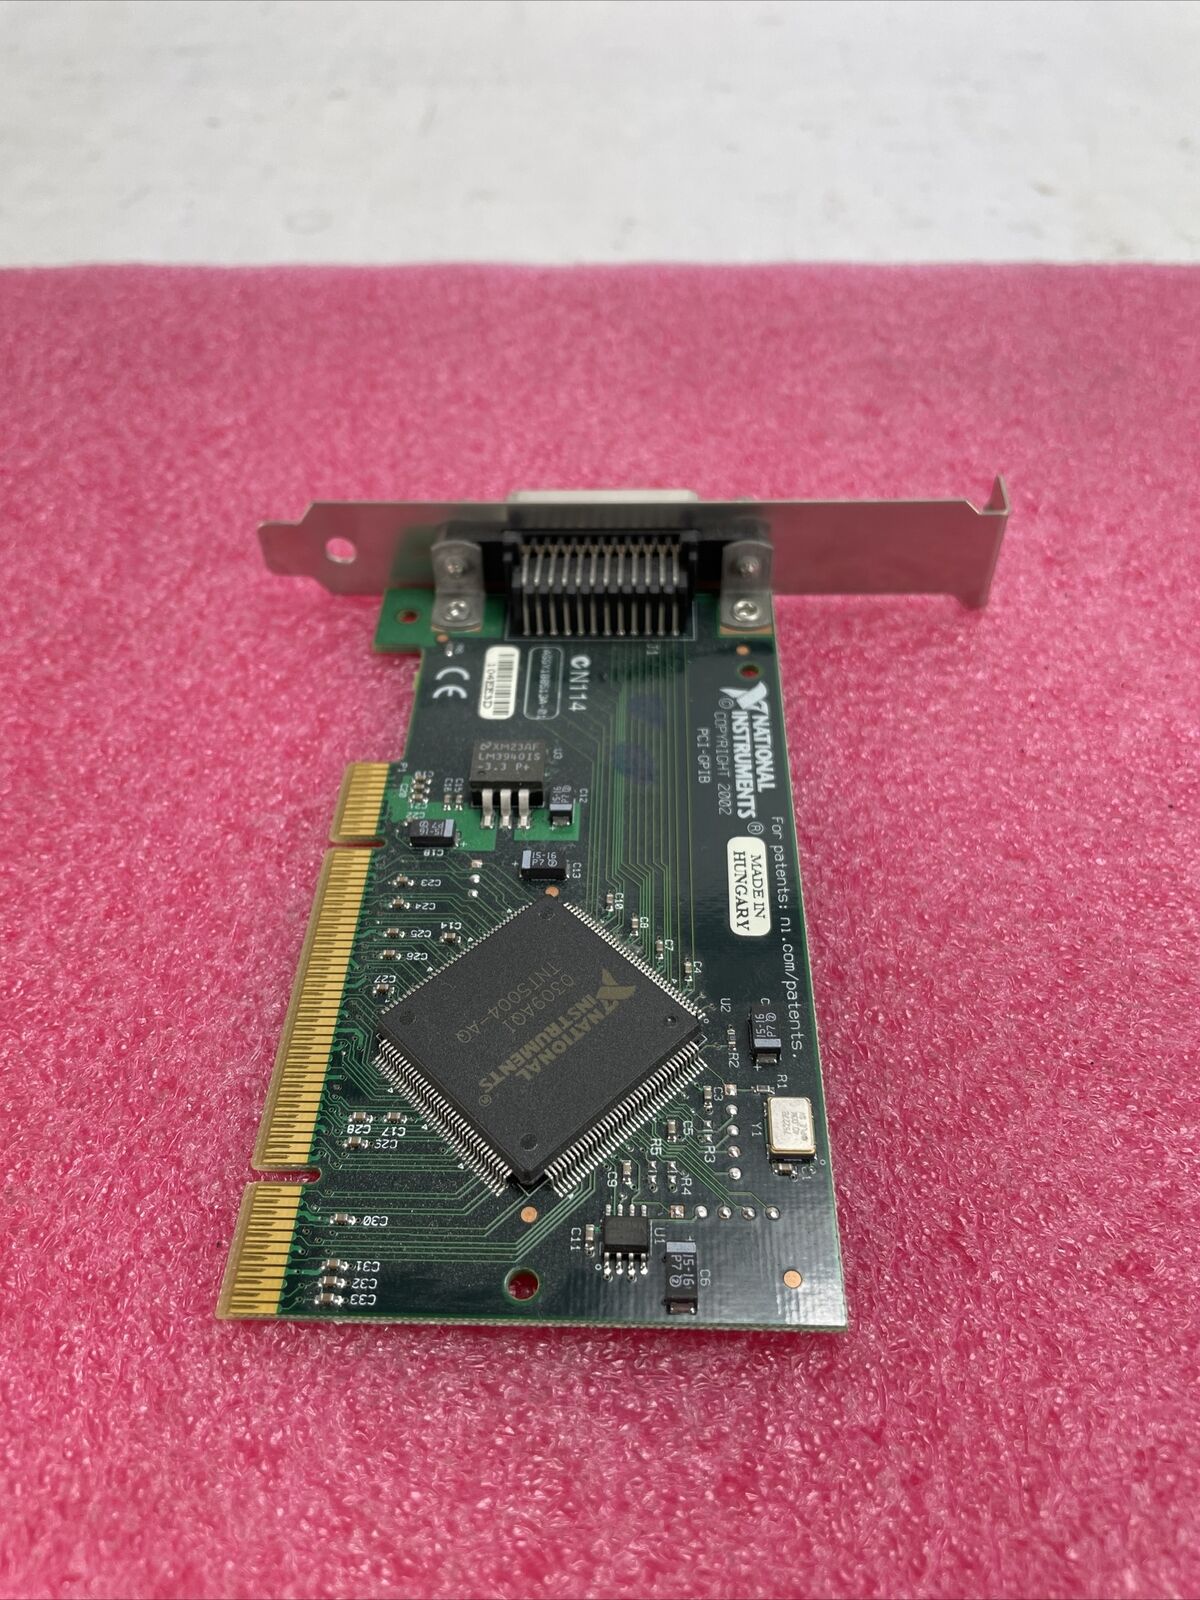 National Istruments PCI-GPIB IEEE Controller Card